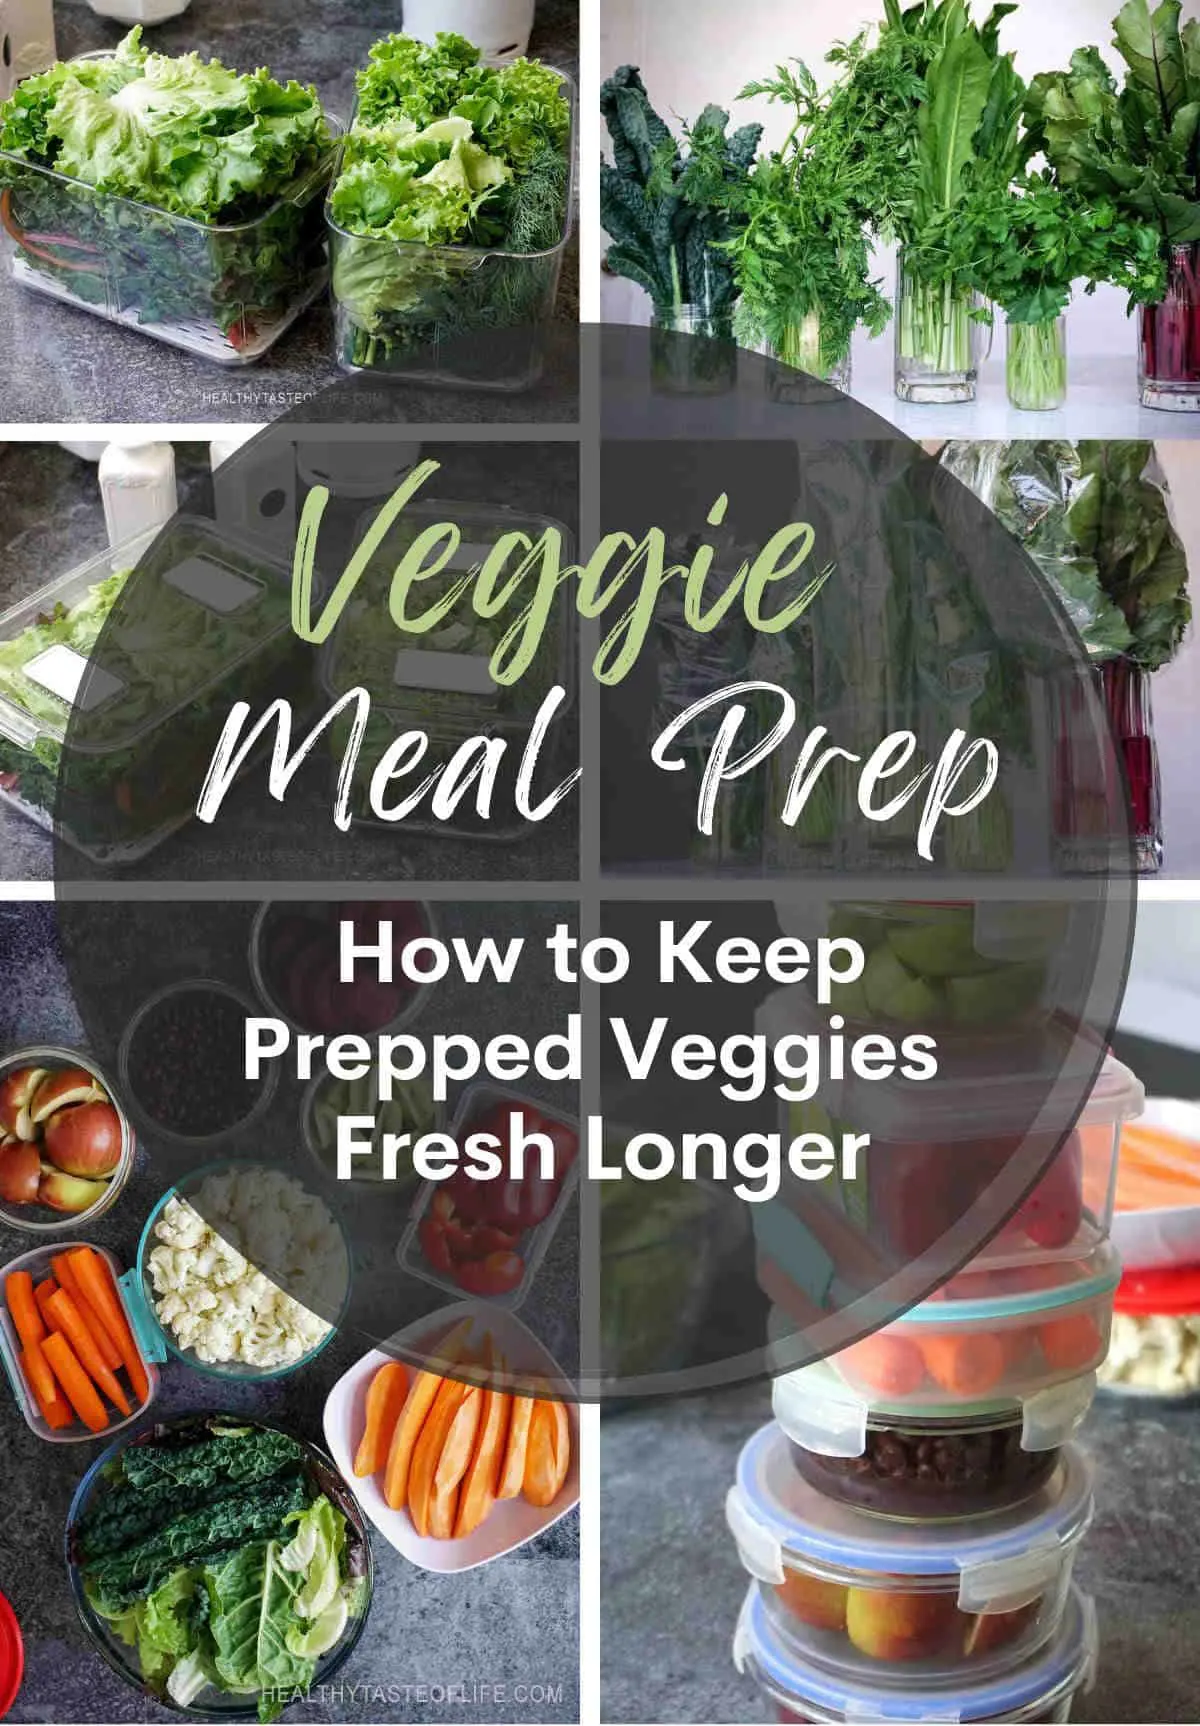 How to Eat More Vegetables and Fruits with Meal Prep - Kristine's Kitchen